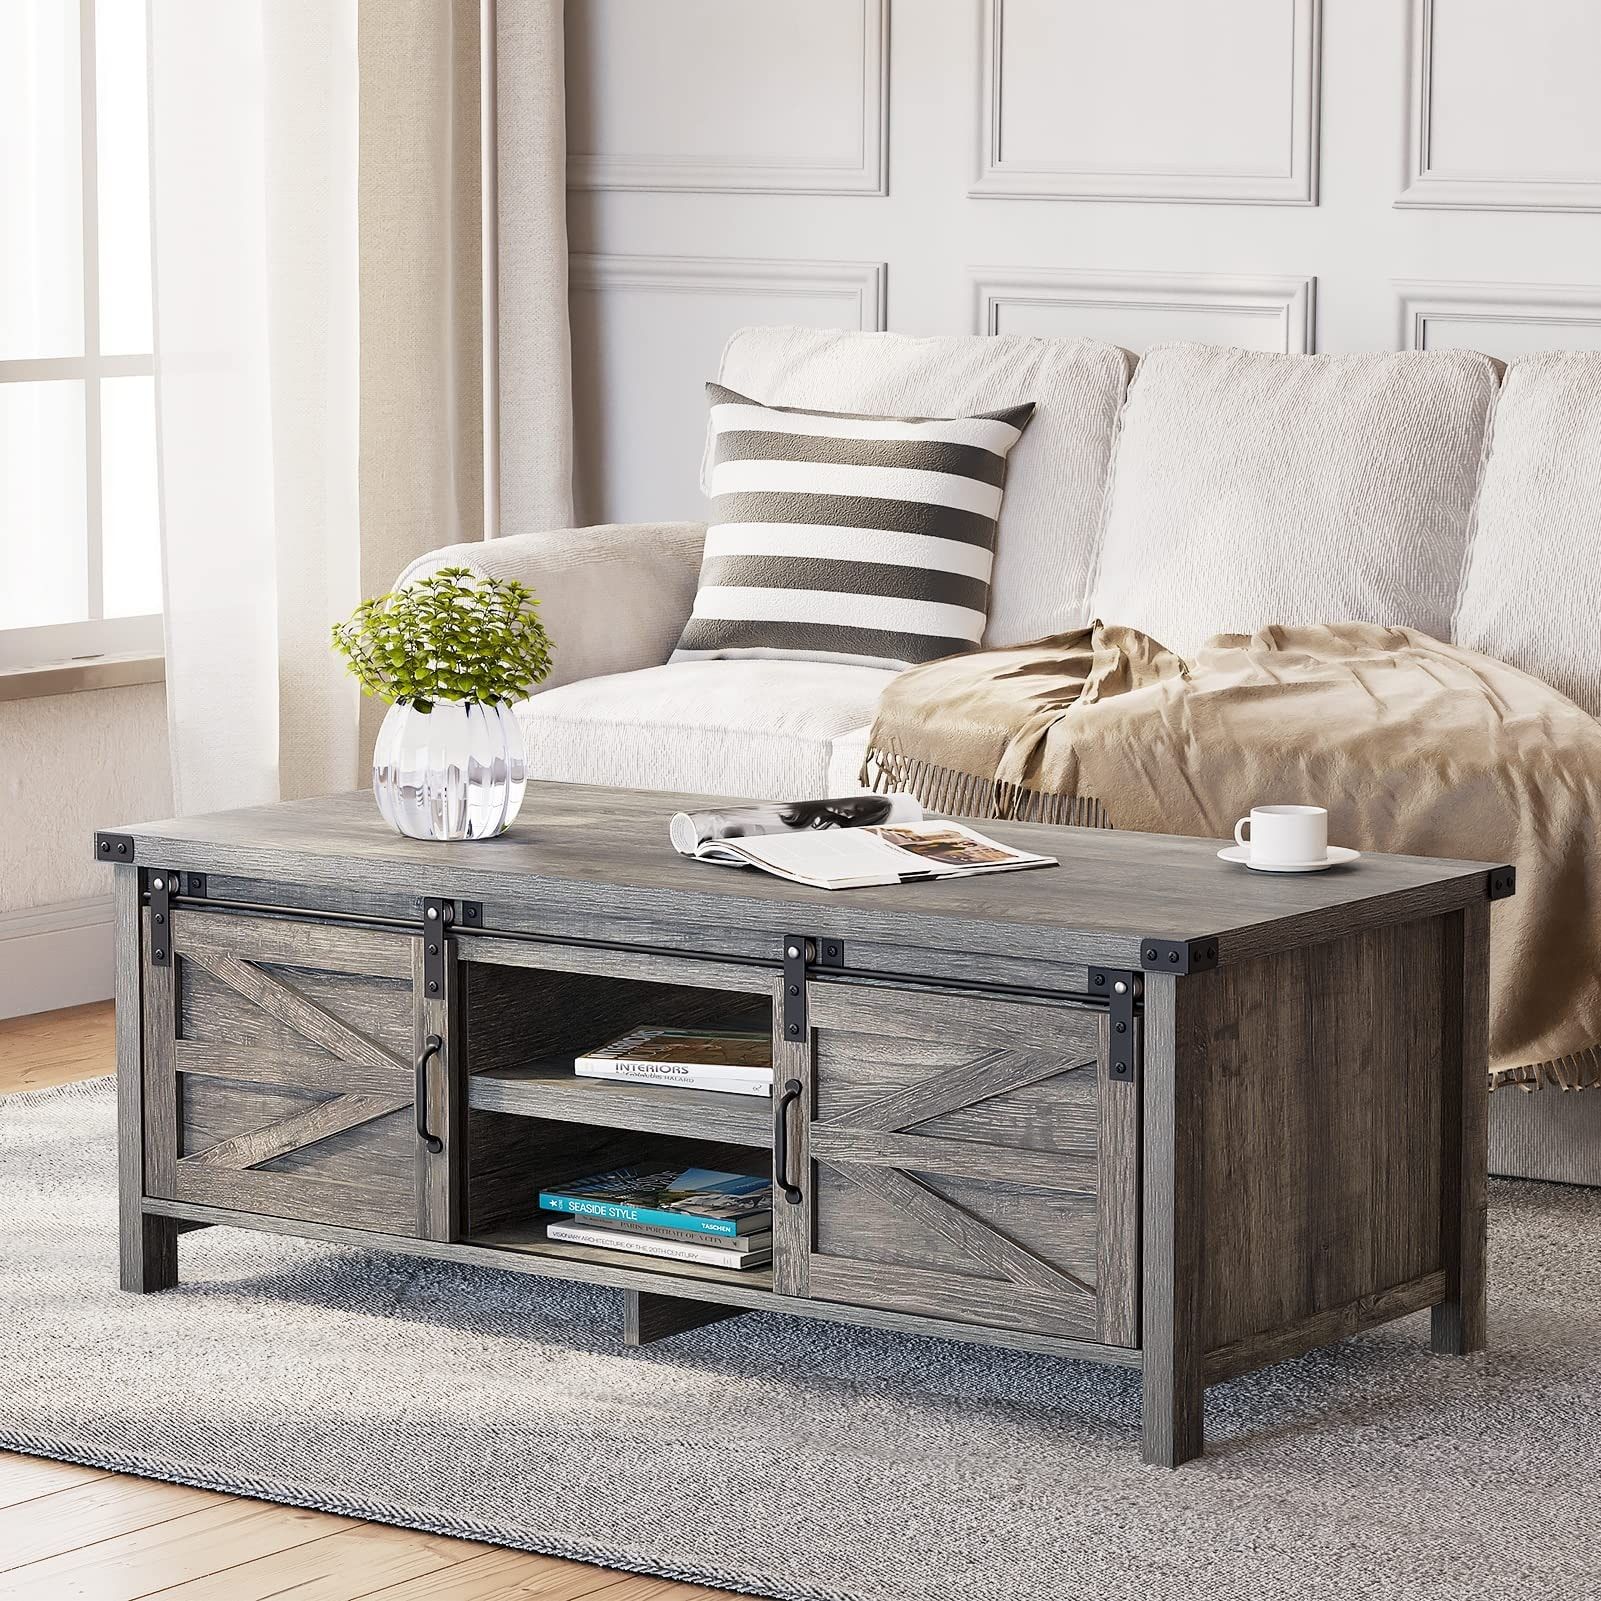 Farmhouse Coffee Table With Sliding Barn Doors & Storage, Grey Rustic  Wooden Center Rectangular Tables – Bed Bath & Beyond – 37841722 With Regard To Coffee Tables With Sliding Barn Doors (Photo 2 of 15)